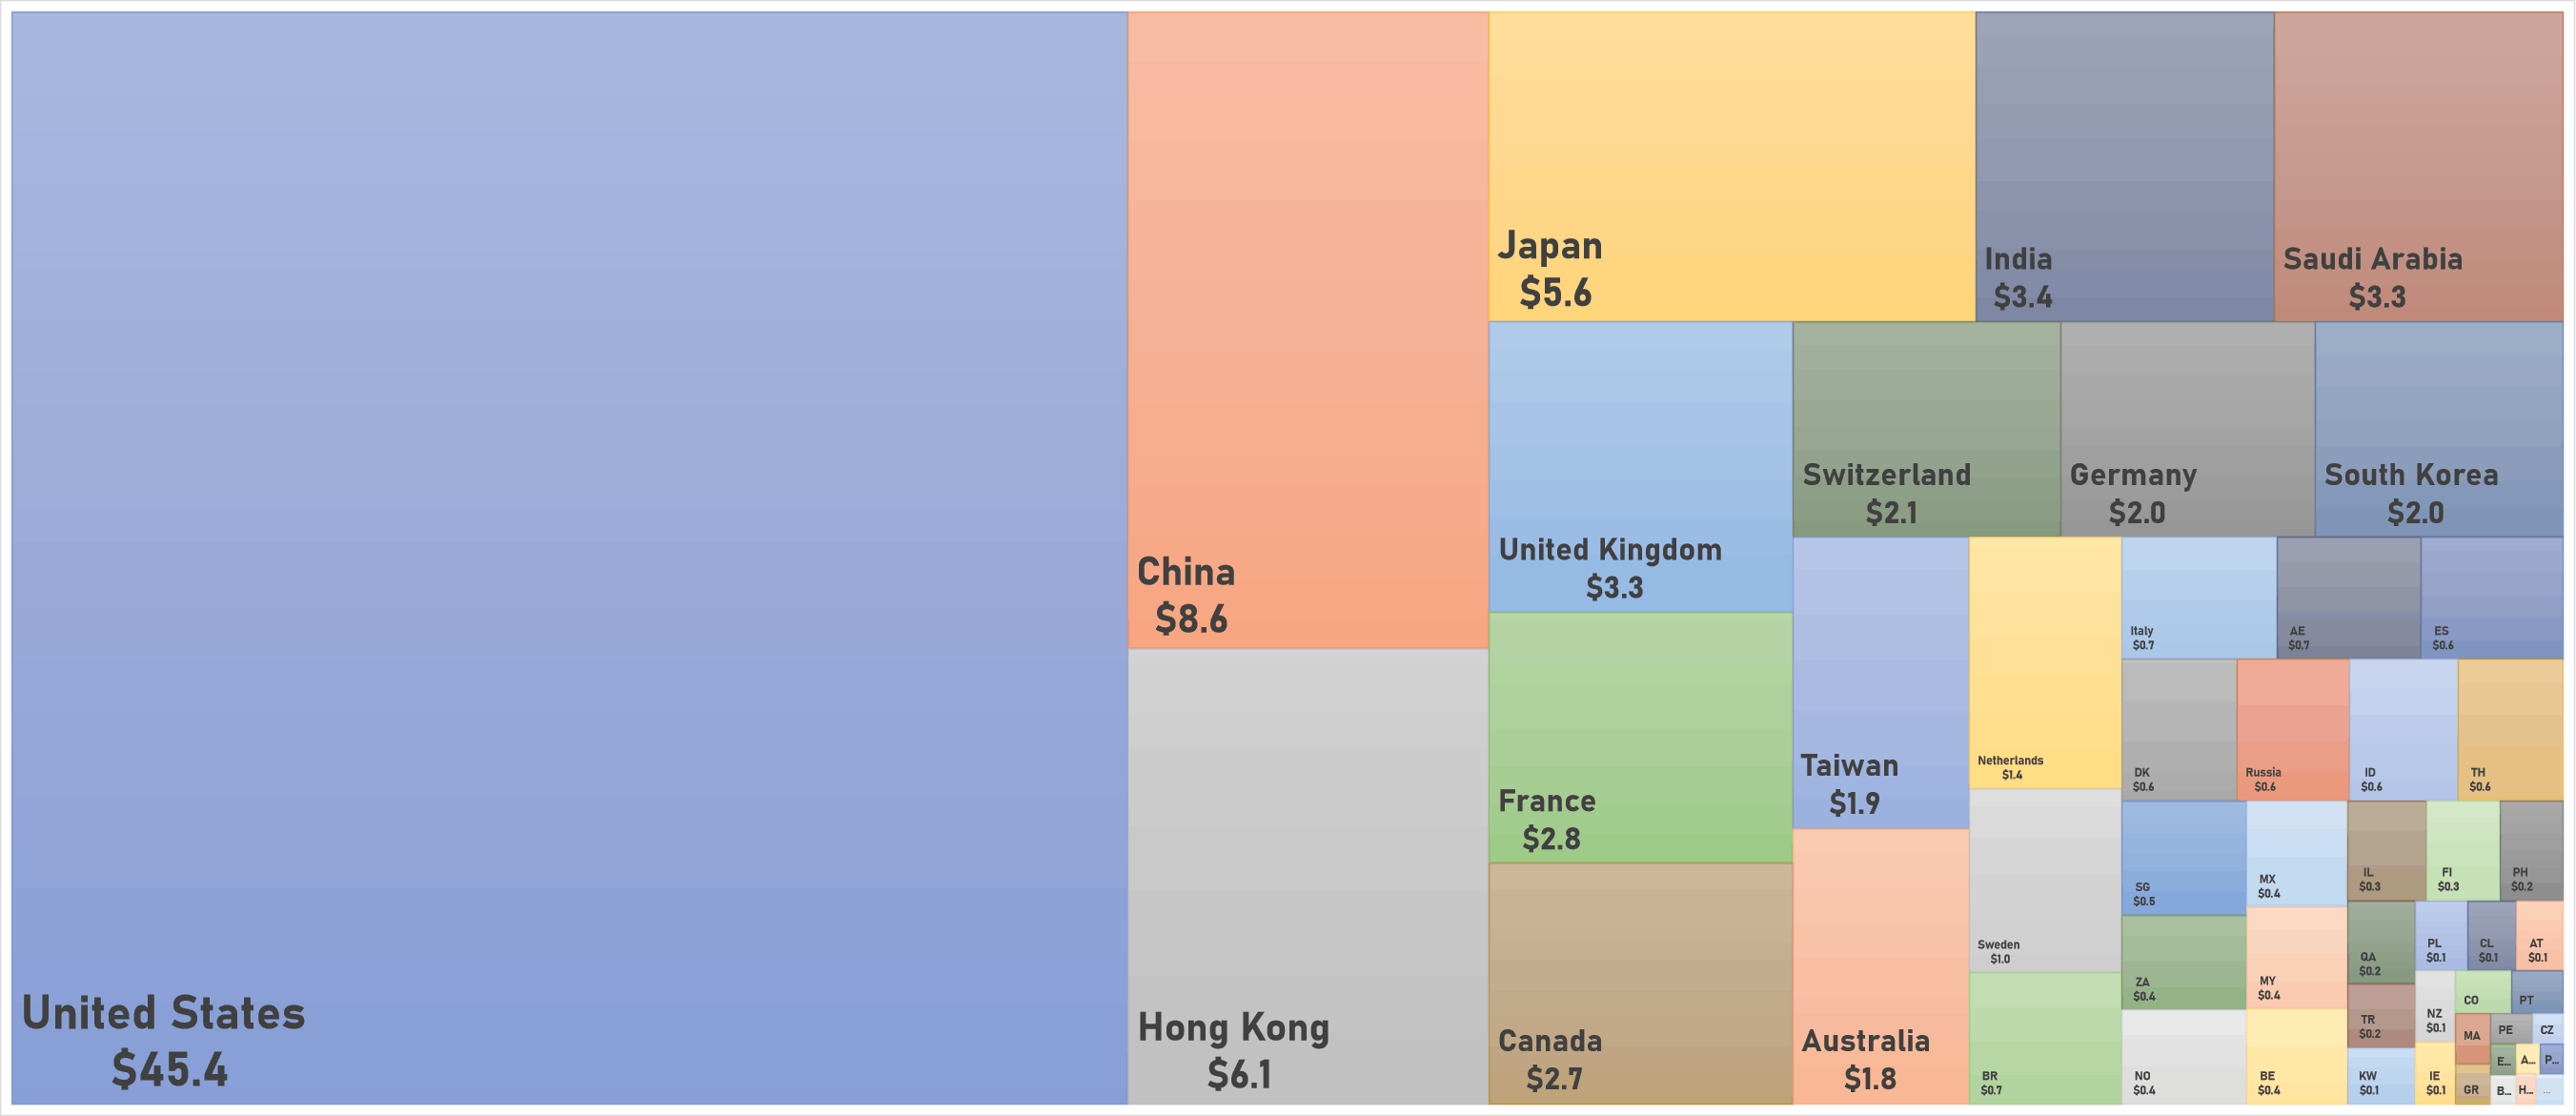 World Market Cap By Country (in USD Trillion) | Sources: phipost.com, FactSet data